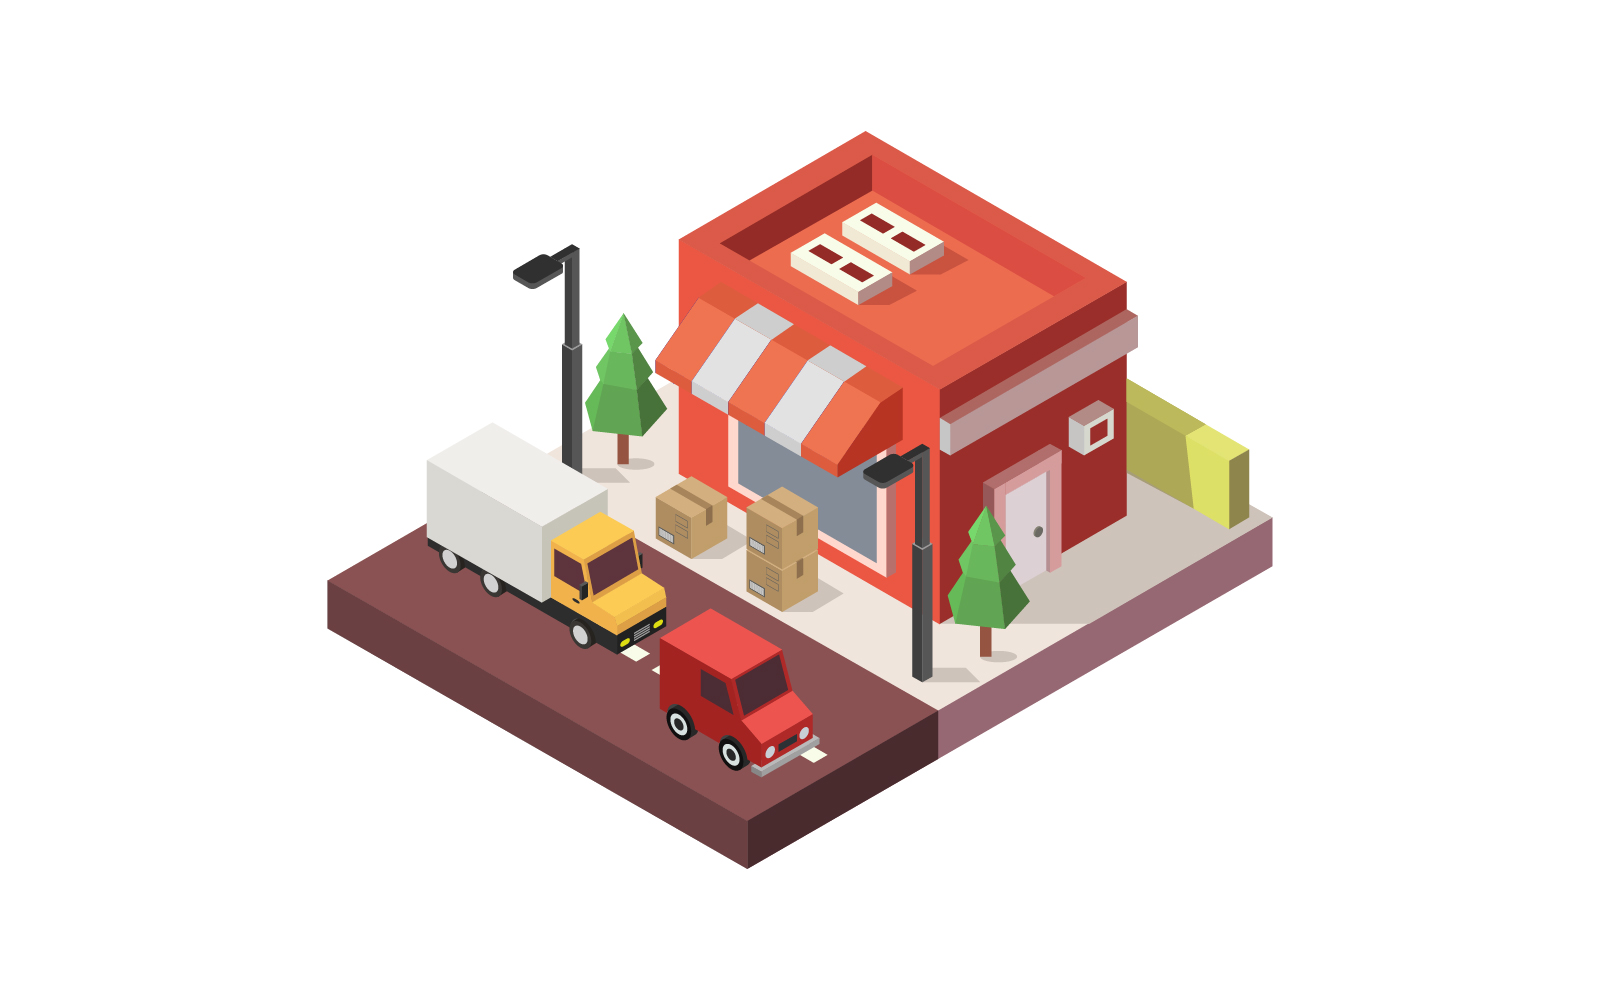 Isometric shop illustrated in vector on background